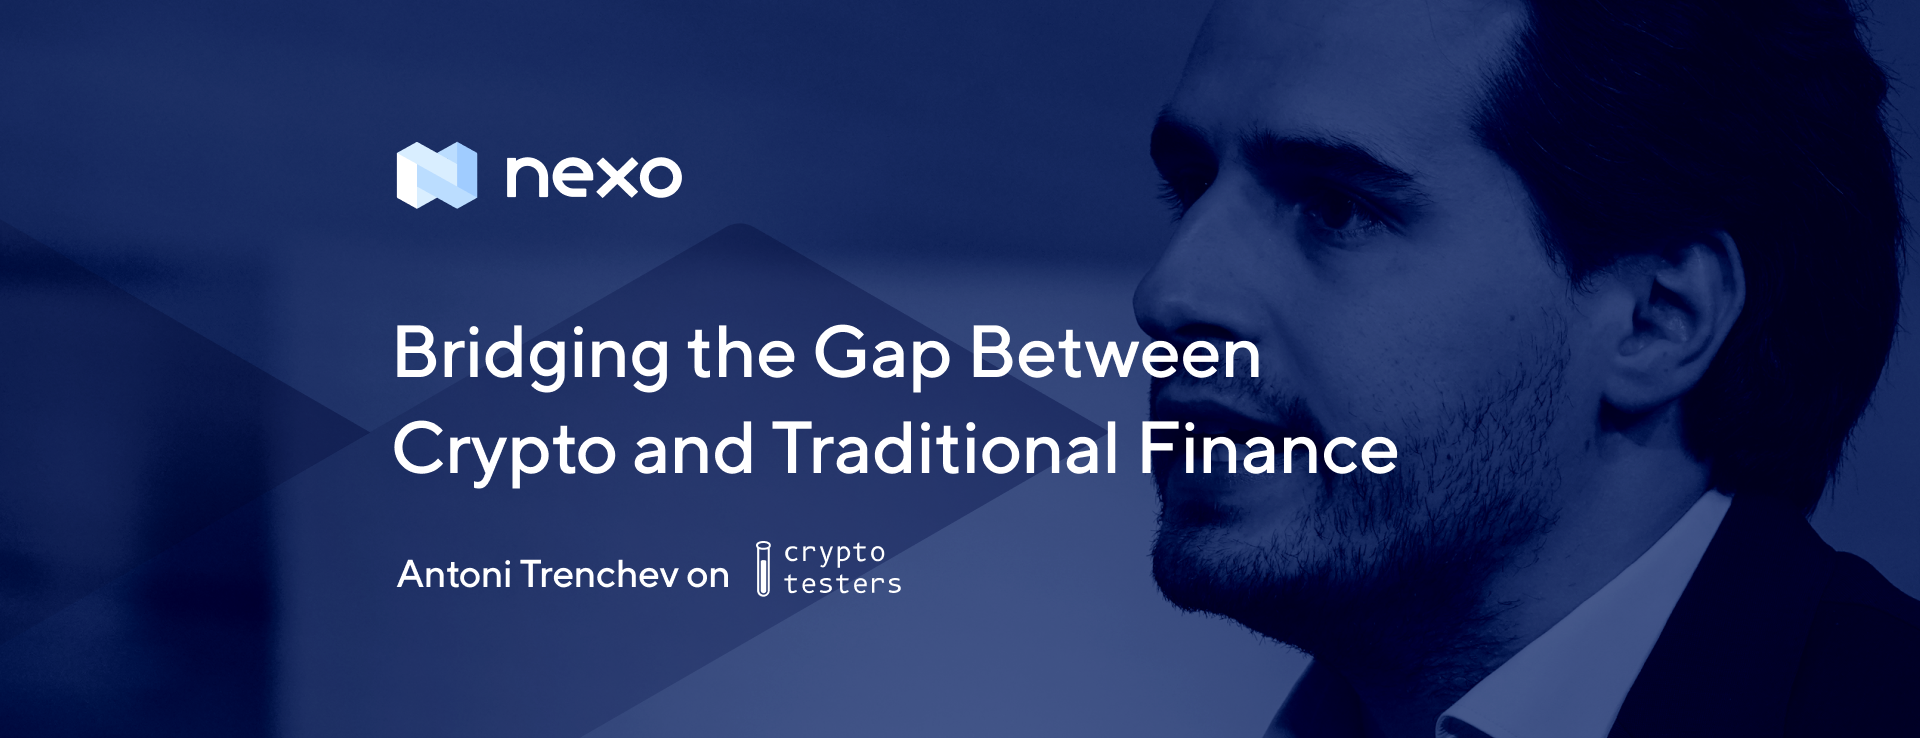 Bridging the Gap Between Crypto and Traditional Finance